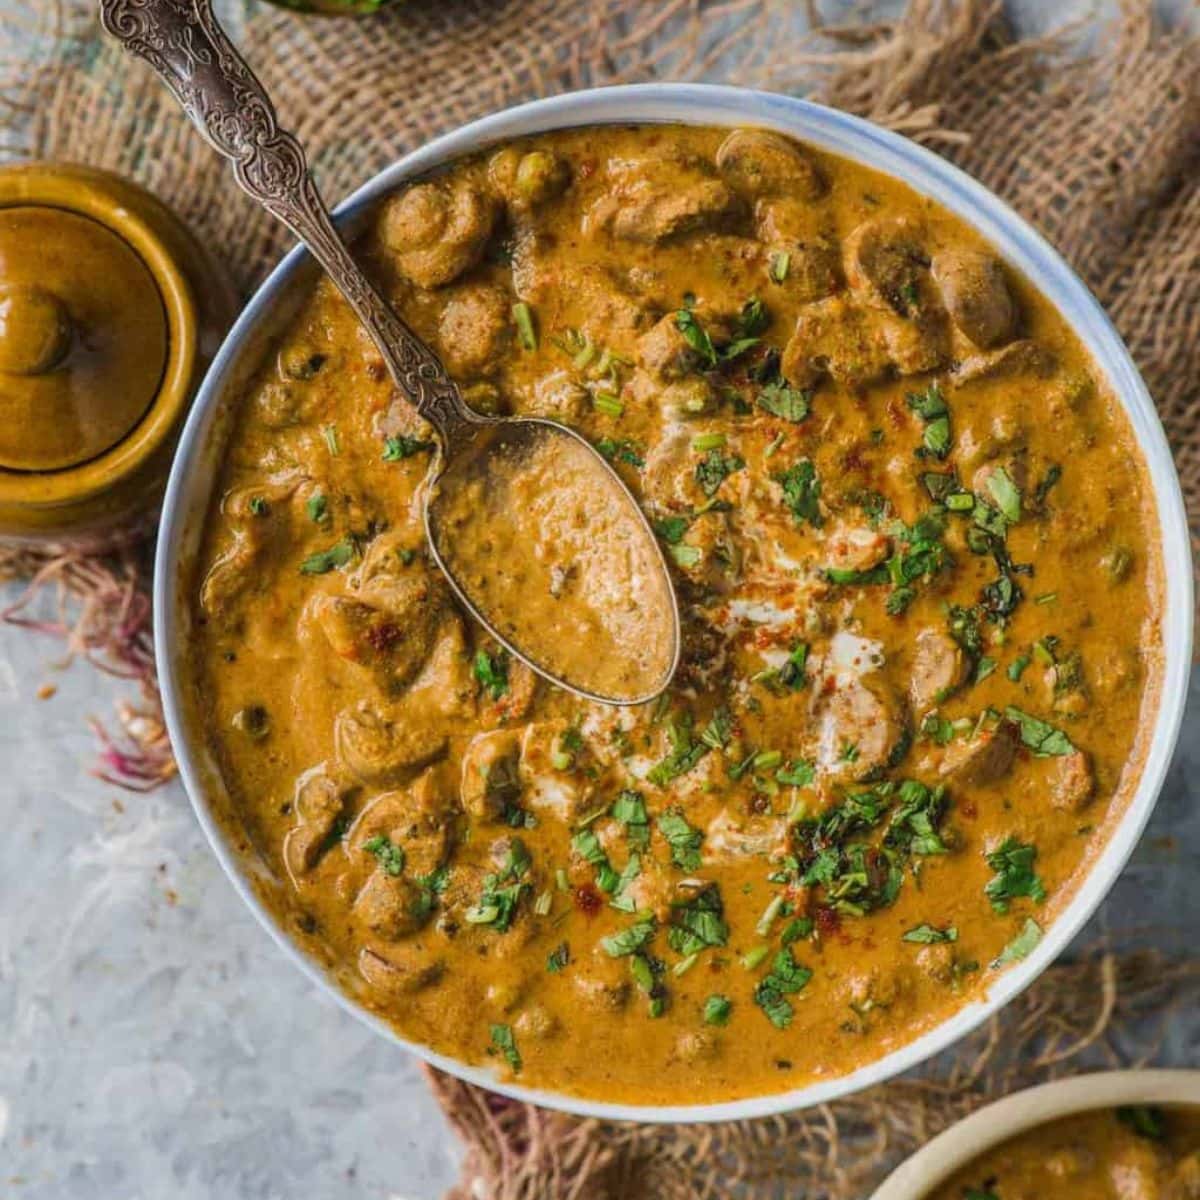 Mushroom masala in a bowl with spoon